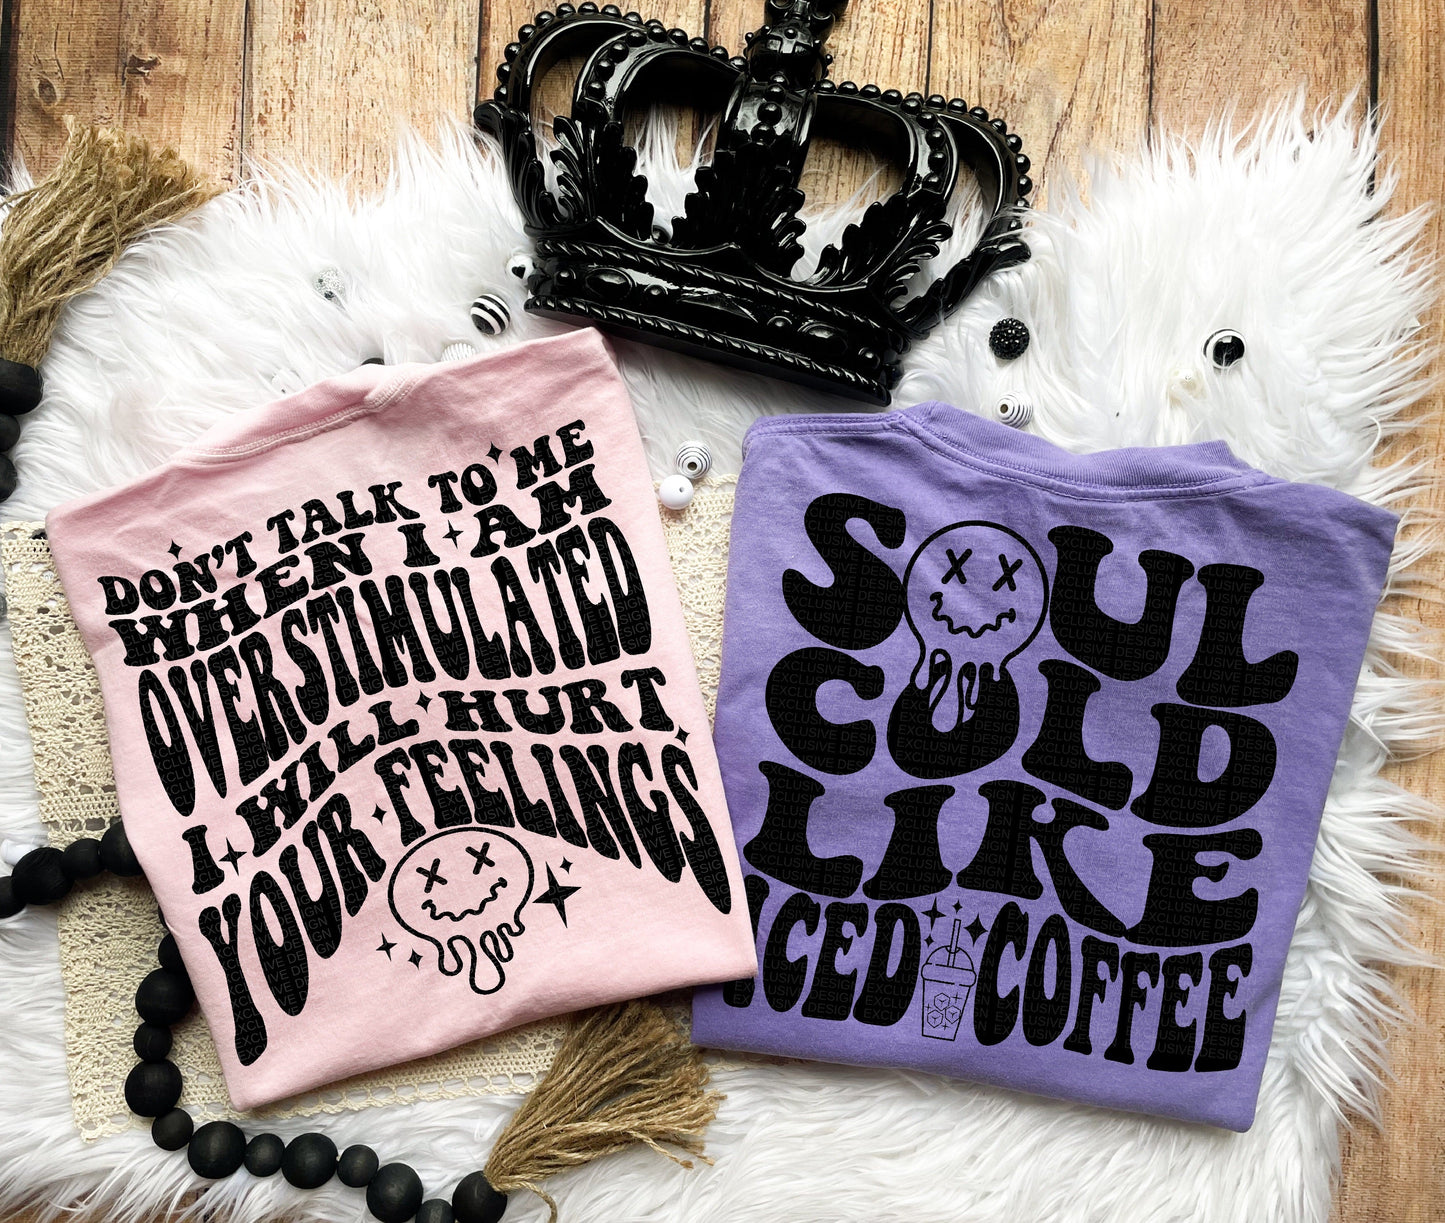 Soul Cold Iced Coffee T-Shirt